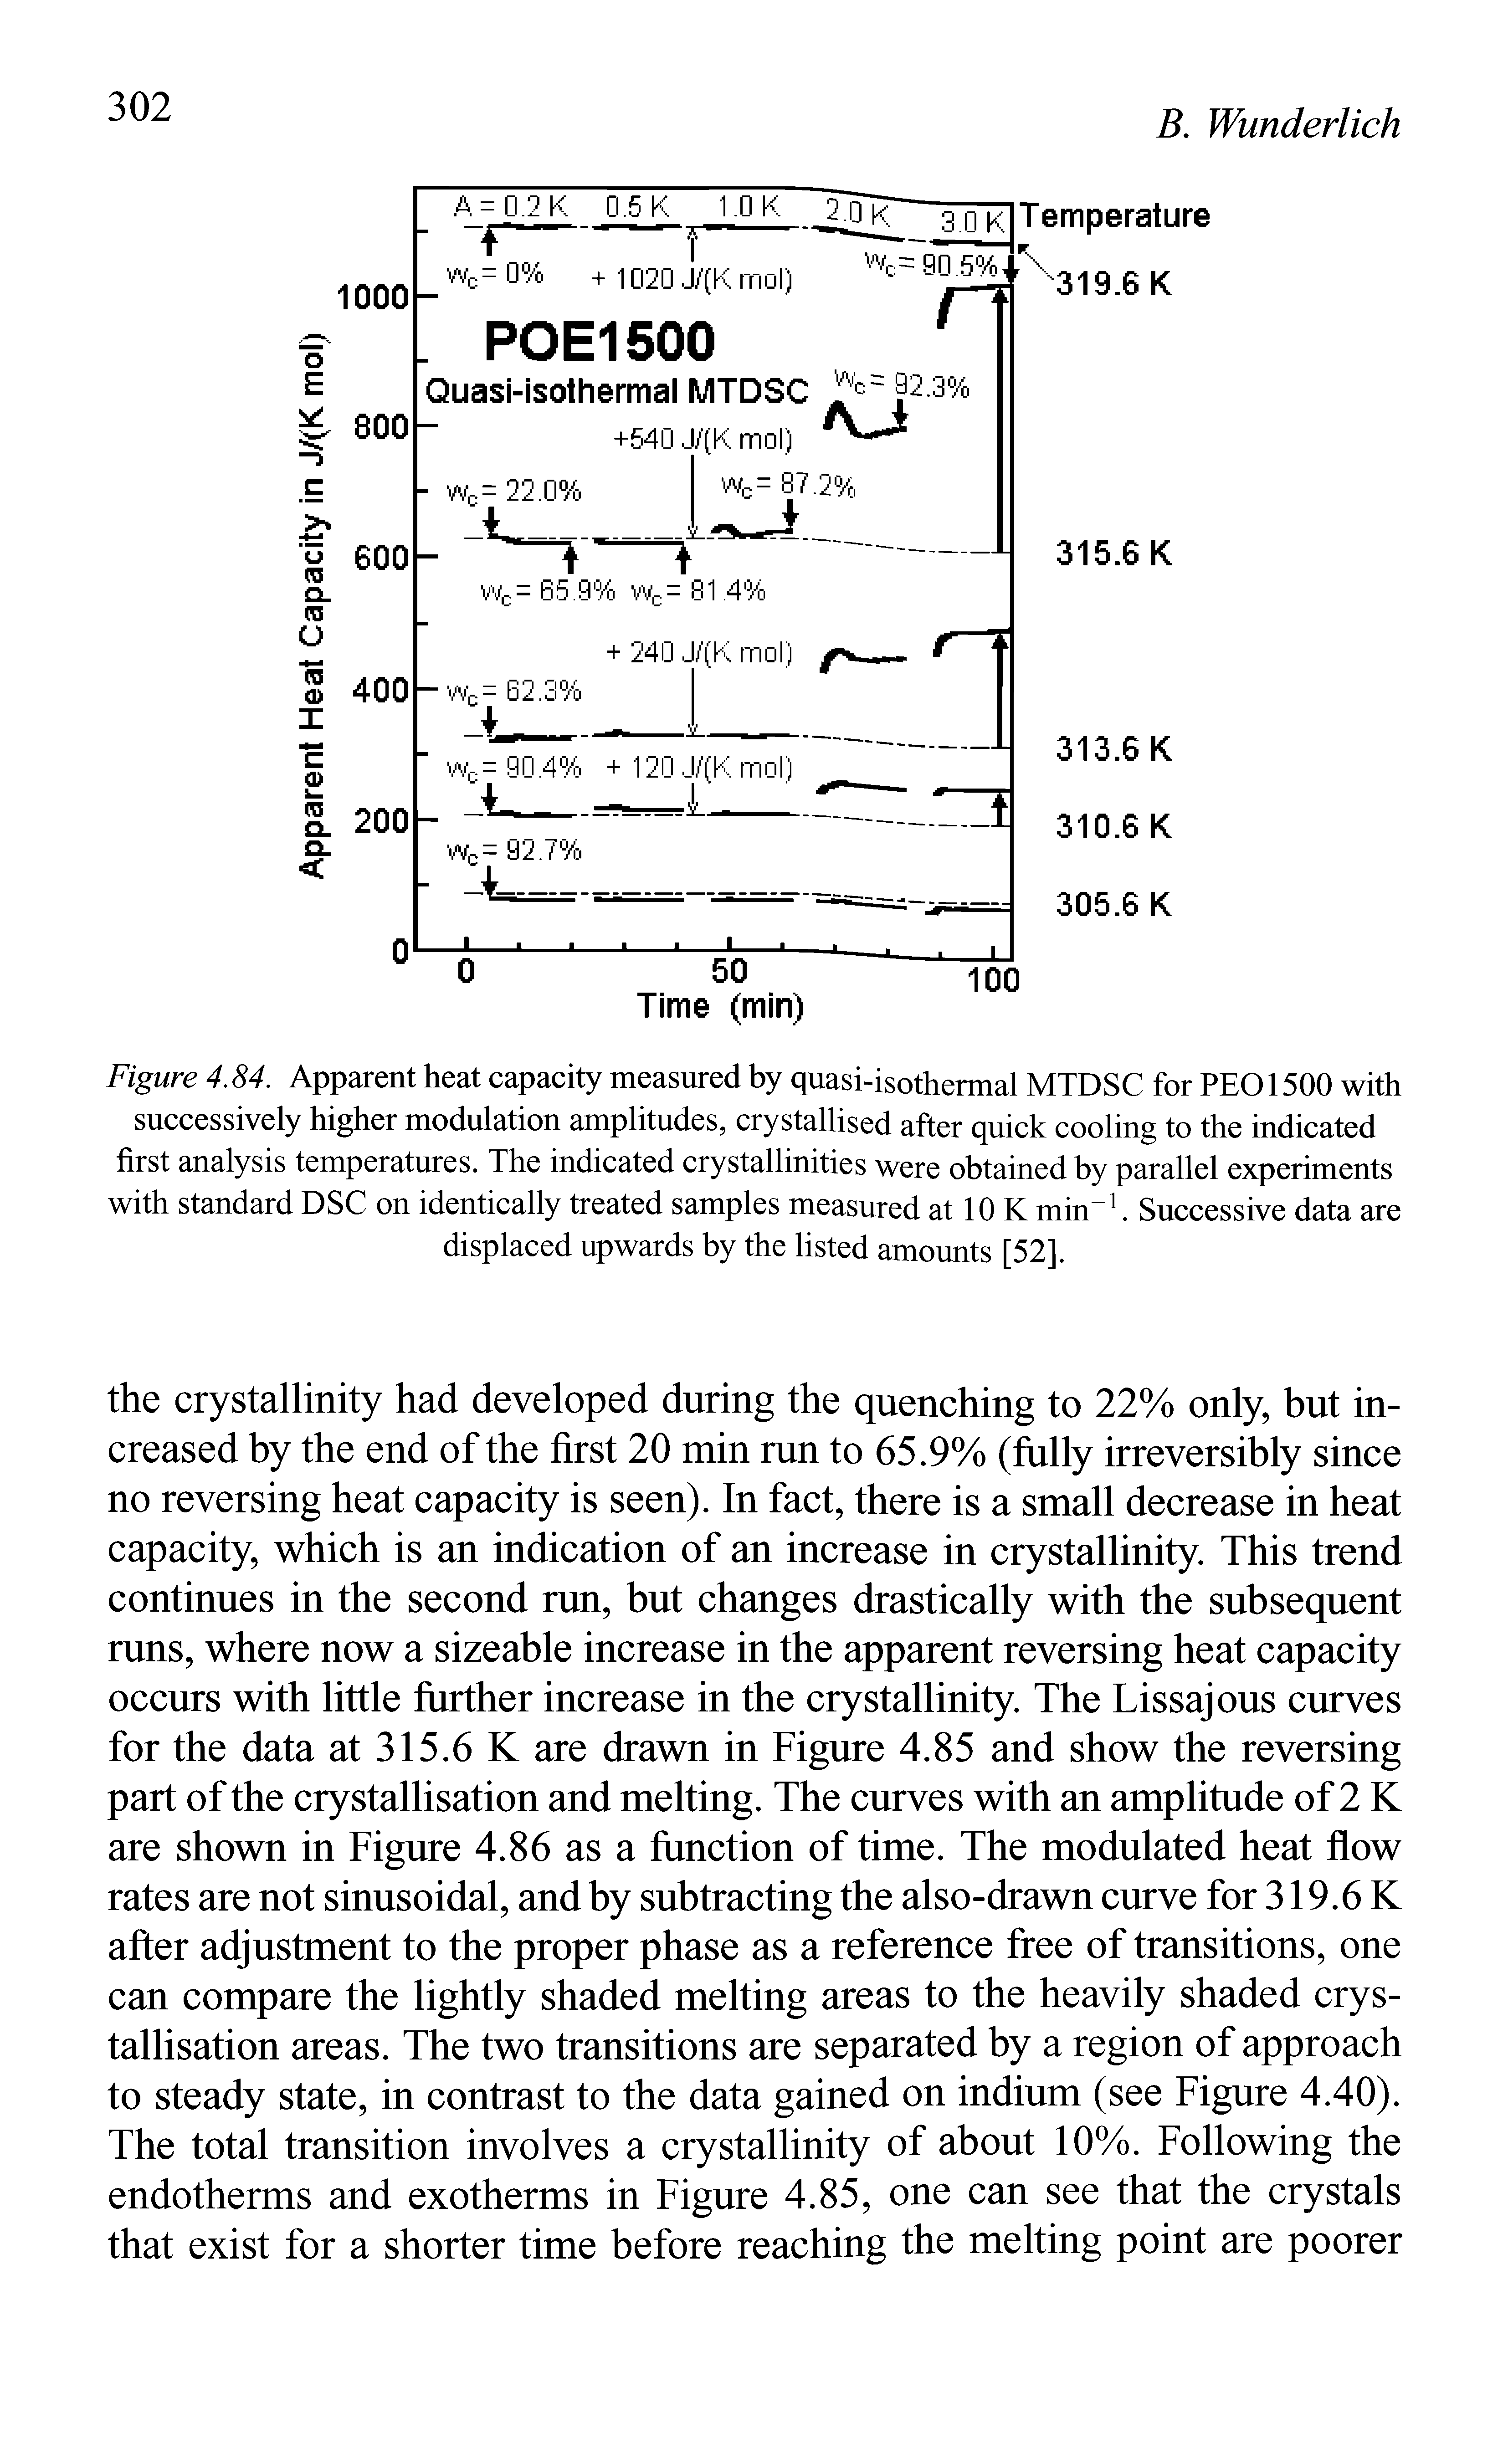 Figure 4.84. Apparent heat capacity measured by quasi-isothermal MTDSC for PEG1500 with successively higher modulation amplitudes, crystallised after quick cooling to the indicated first analysis temperatures. The indicated erystallinities were obtained by parallel experiments with standard DSC on identically treated samples measured at 10 K min . Successive data are displaced upwards by the listed amounts [52],...